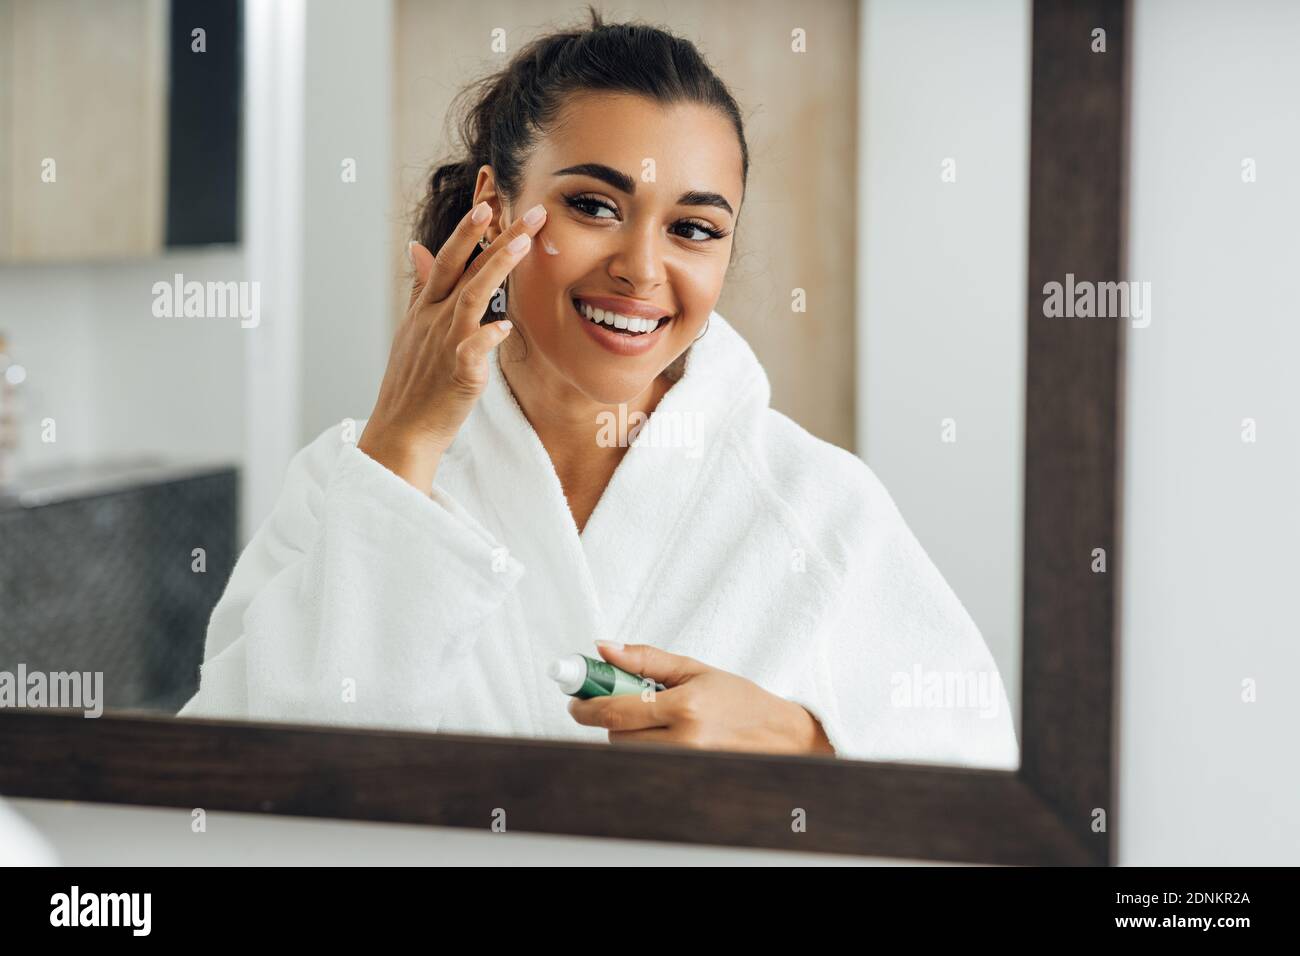 Middle east woman applying cream in bathroom mirror. Young smiling female putting moisturizer on her face. Stock Photo